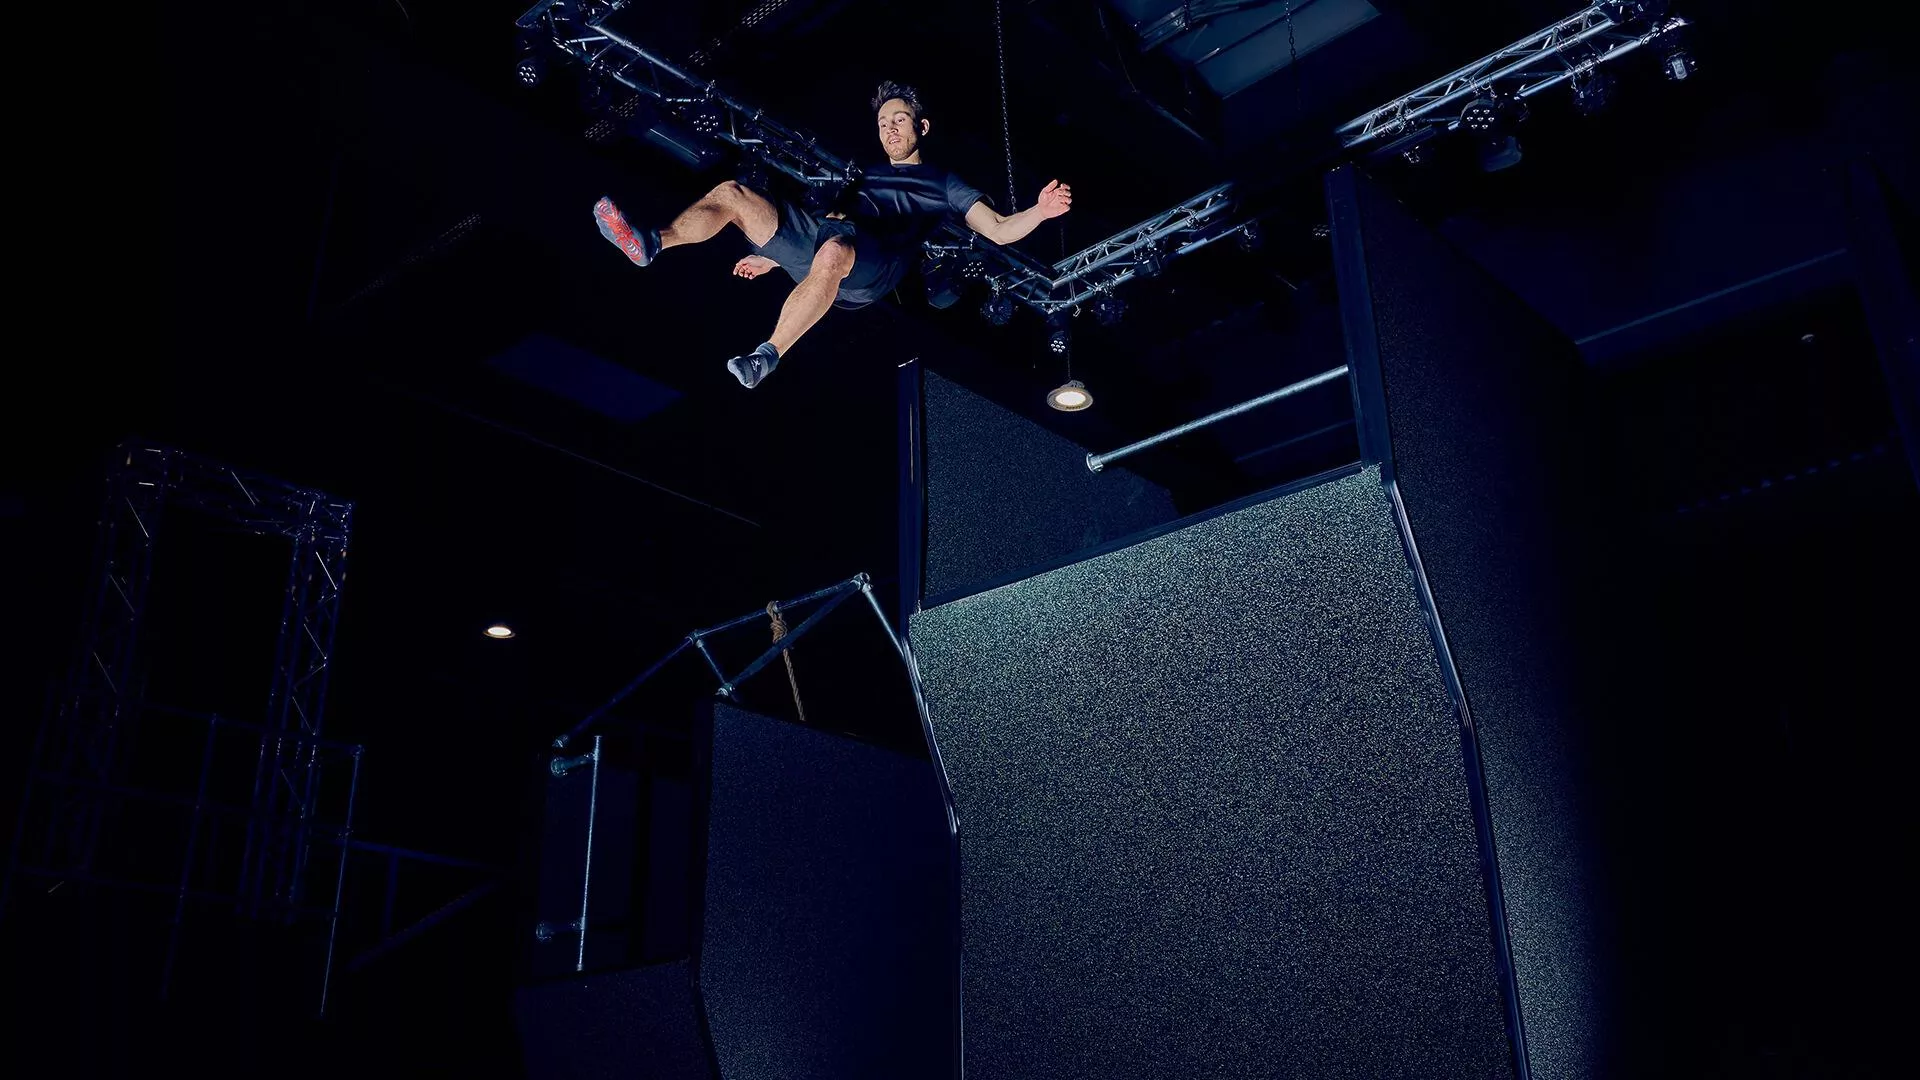  Kafle trampoline park attractions - Jump Tower